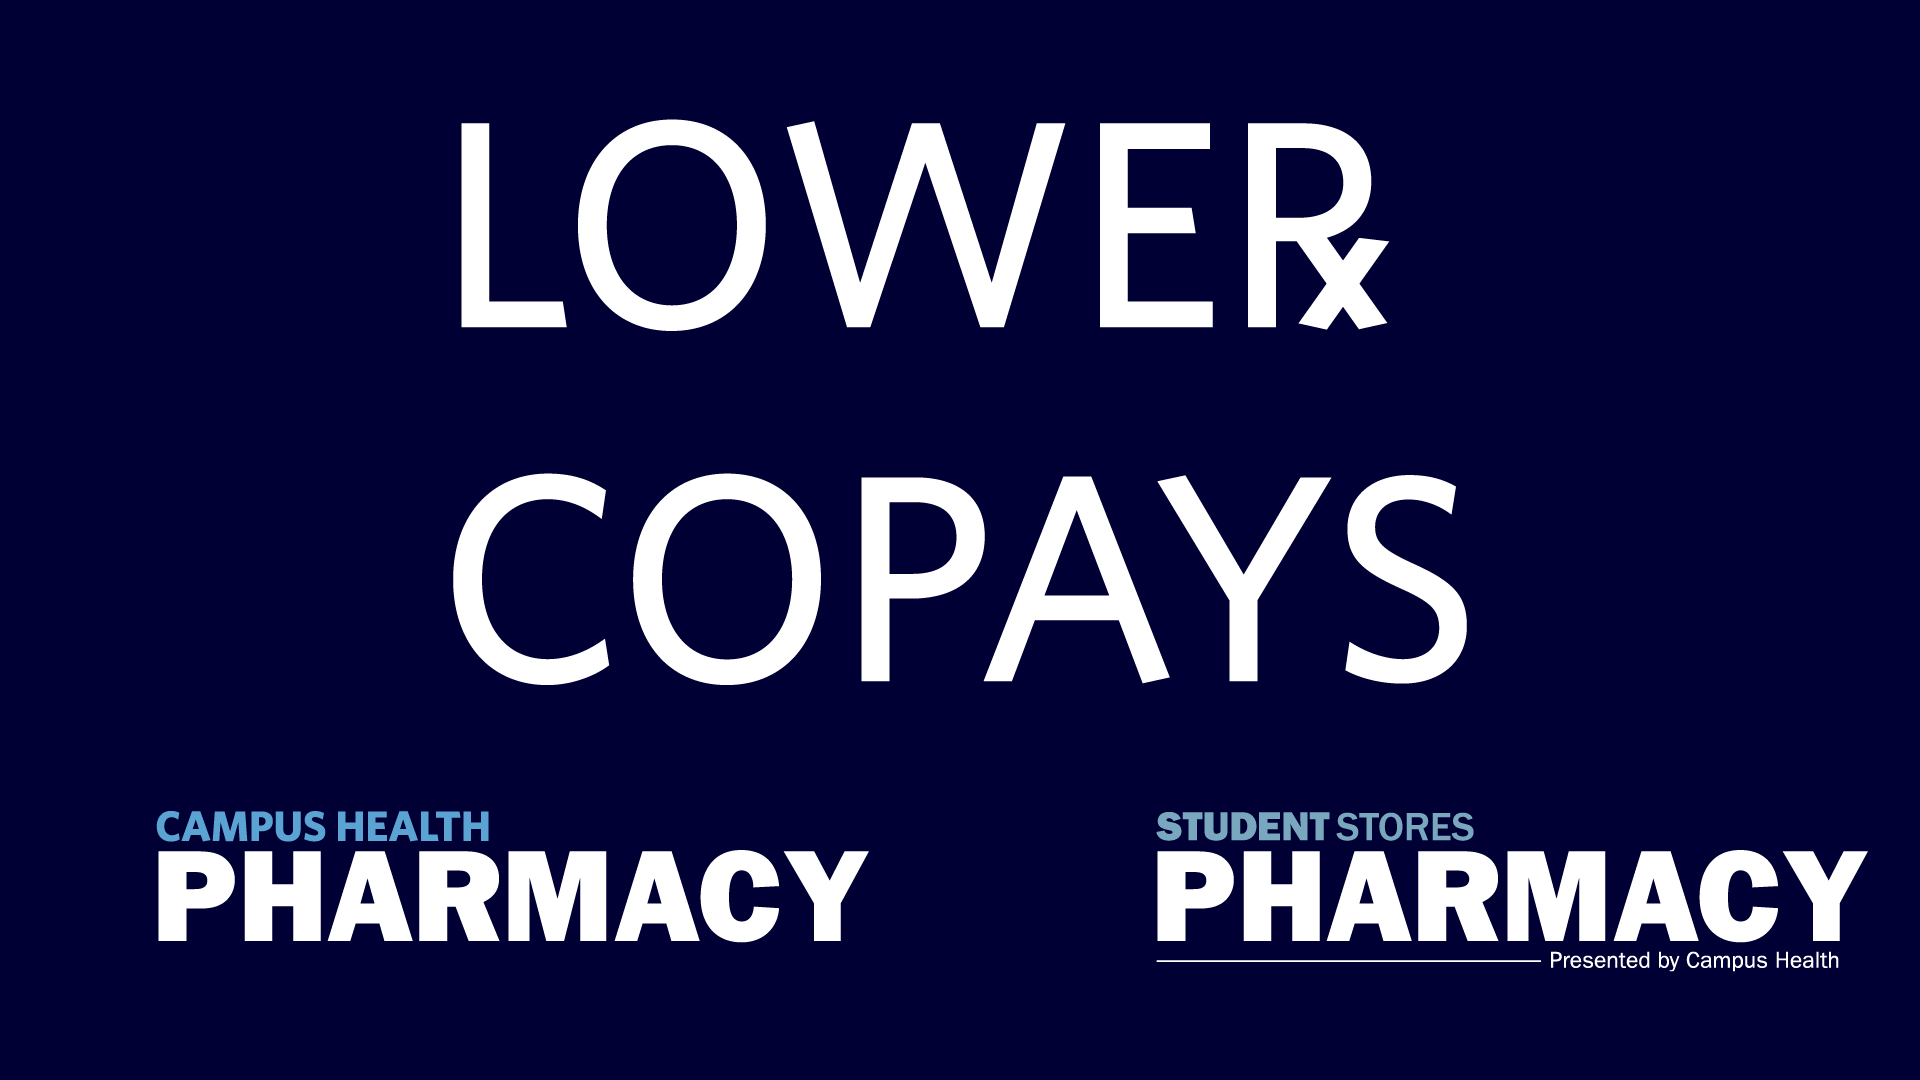 Lower Copays at Campus Health and Student Stores Pharmacies